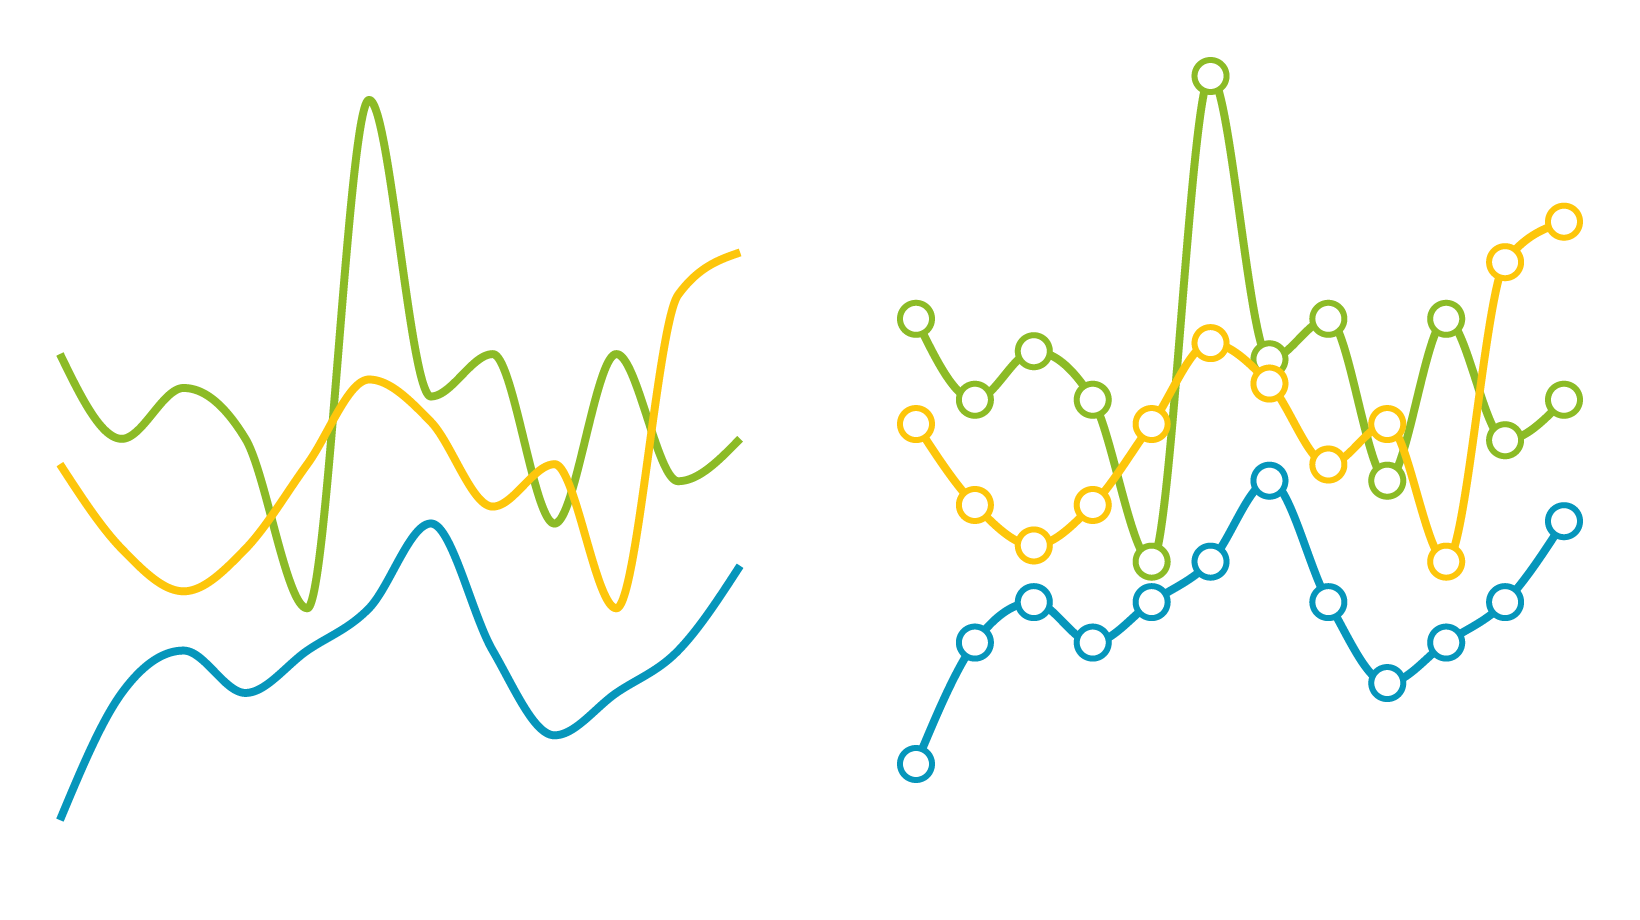 Two line charts, of which one has data marks.